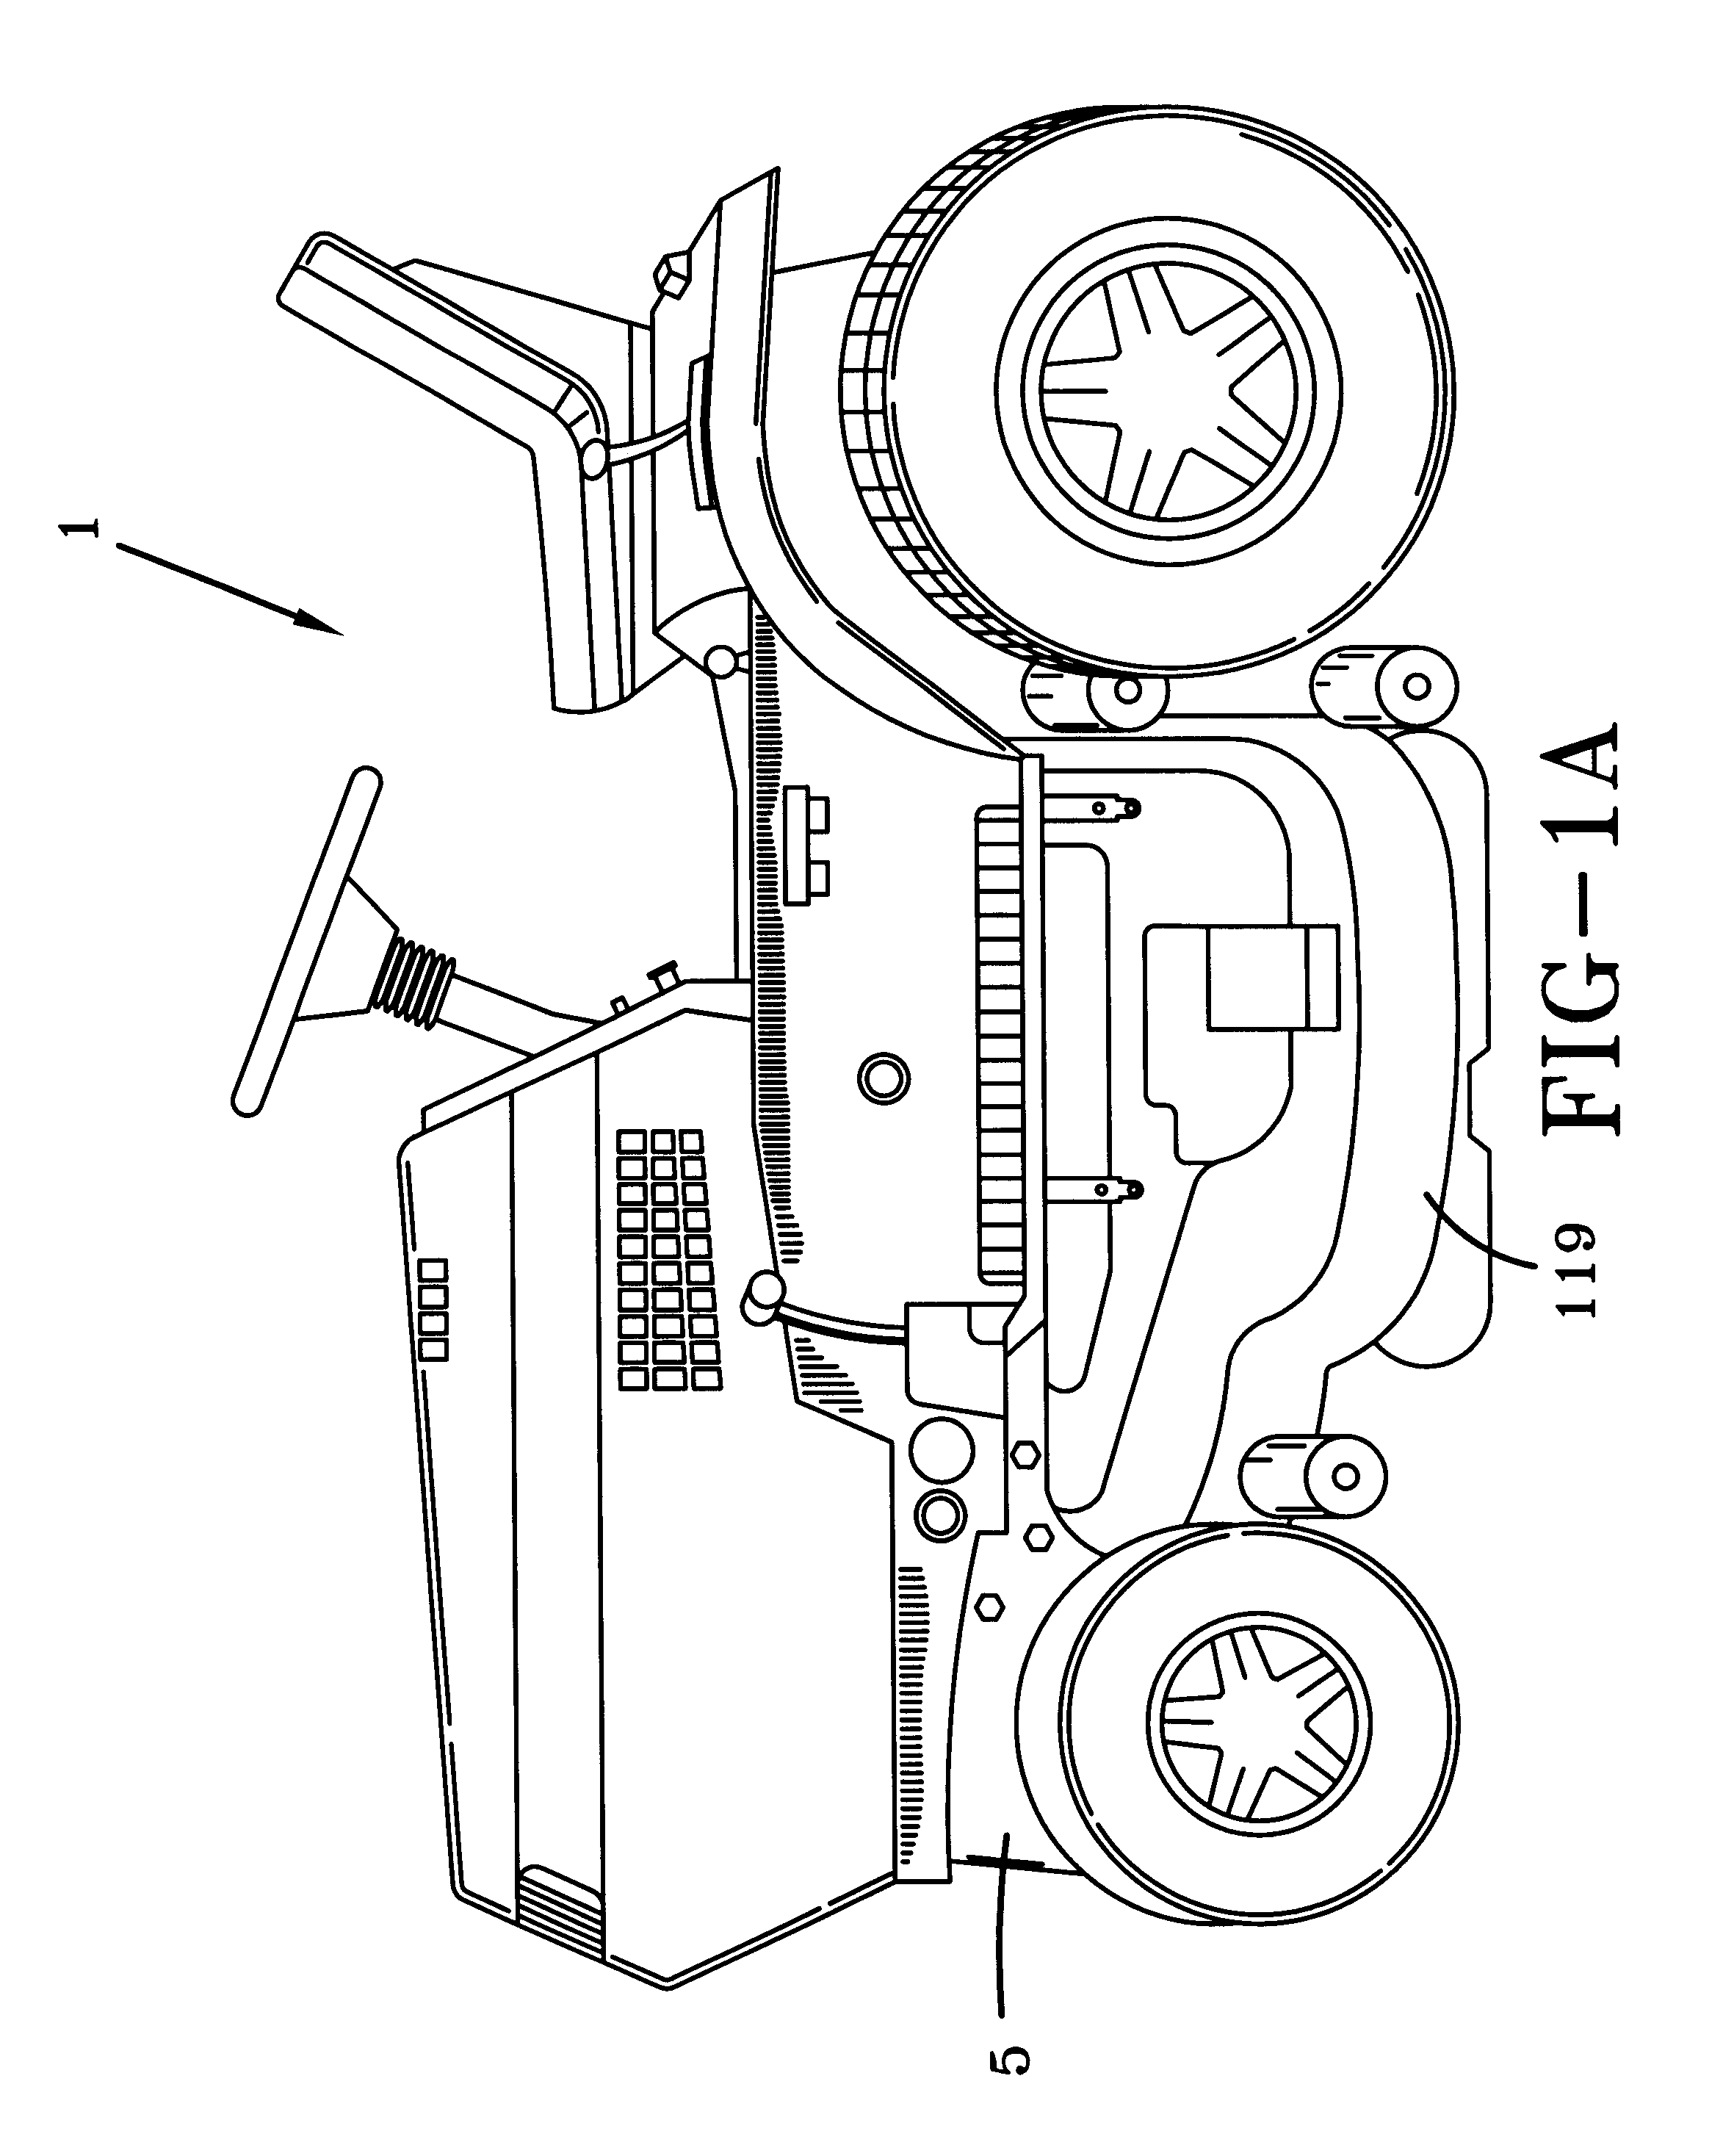 Zero turn radius or ZTR vehicle with a one-pump two motor mechanism